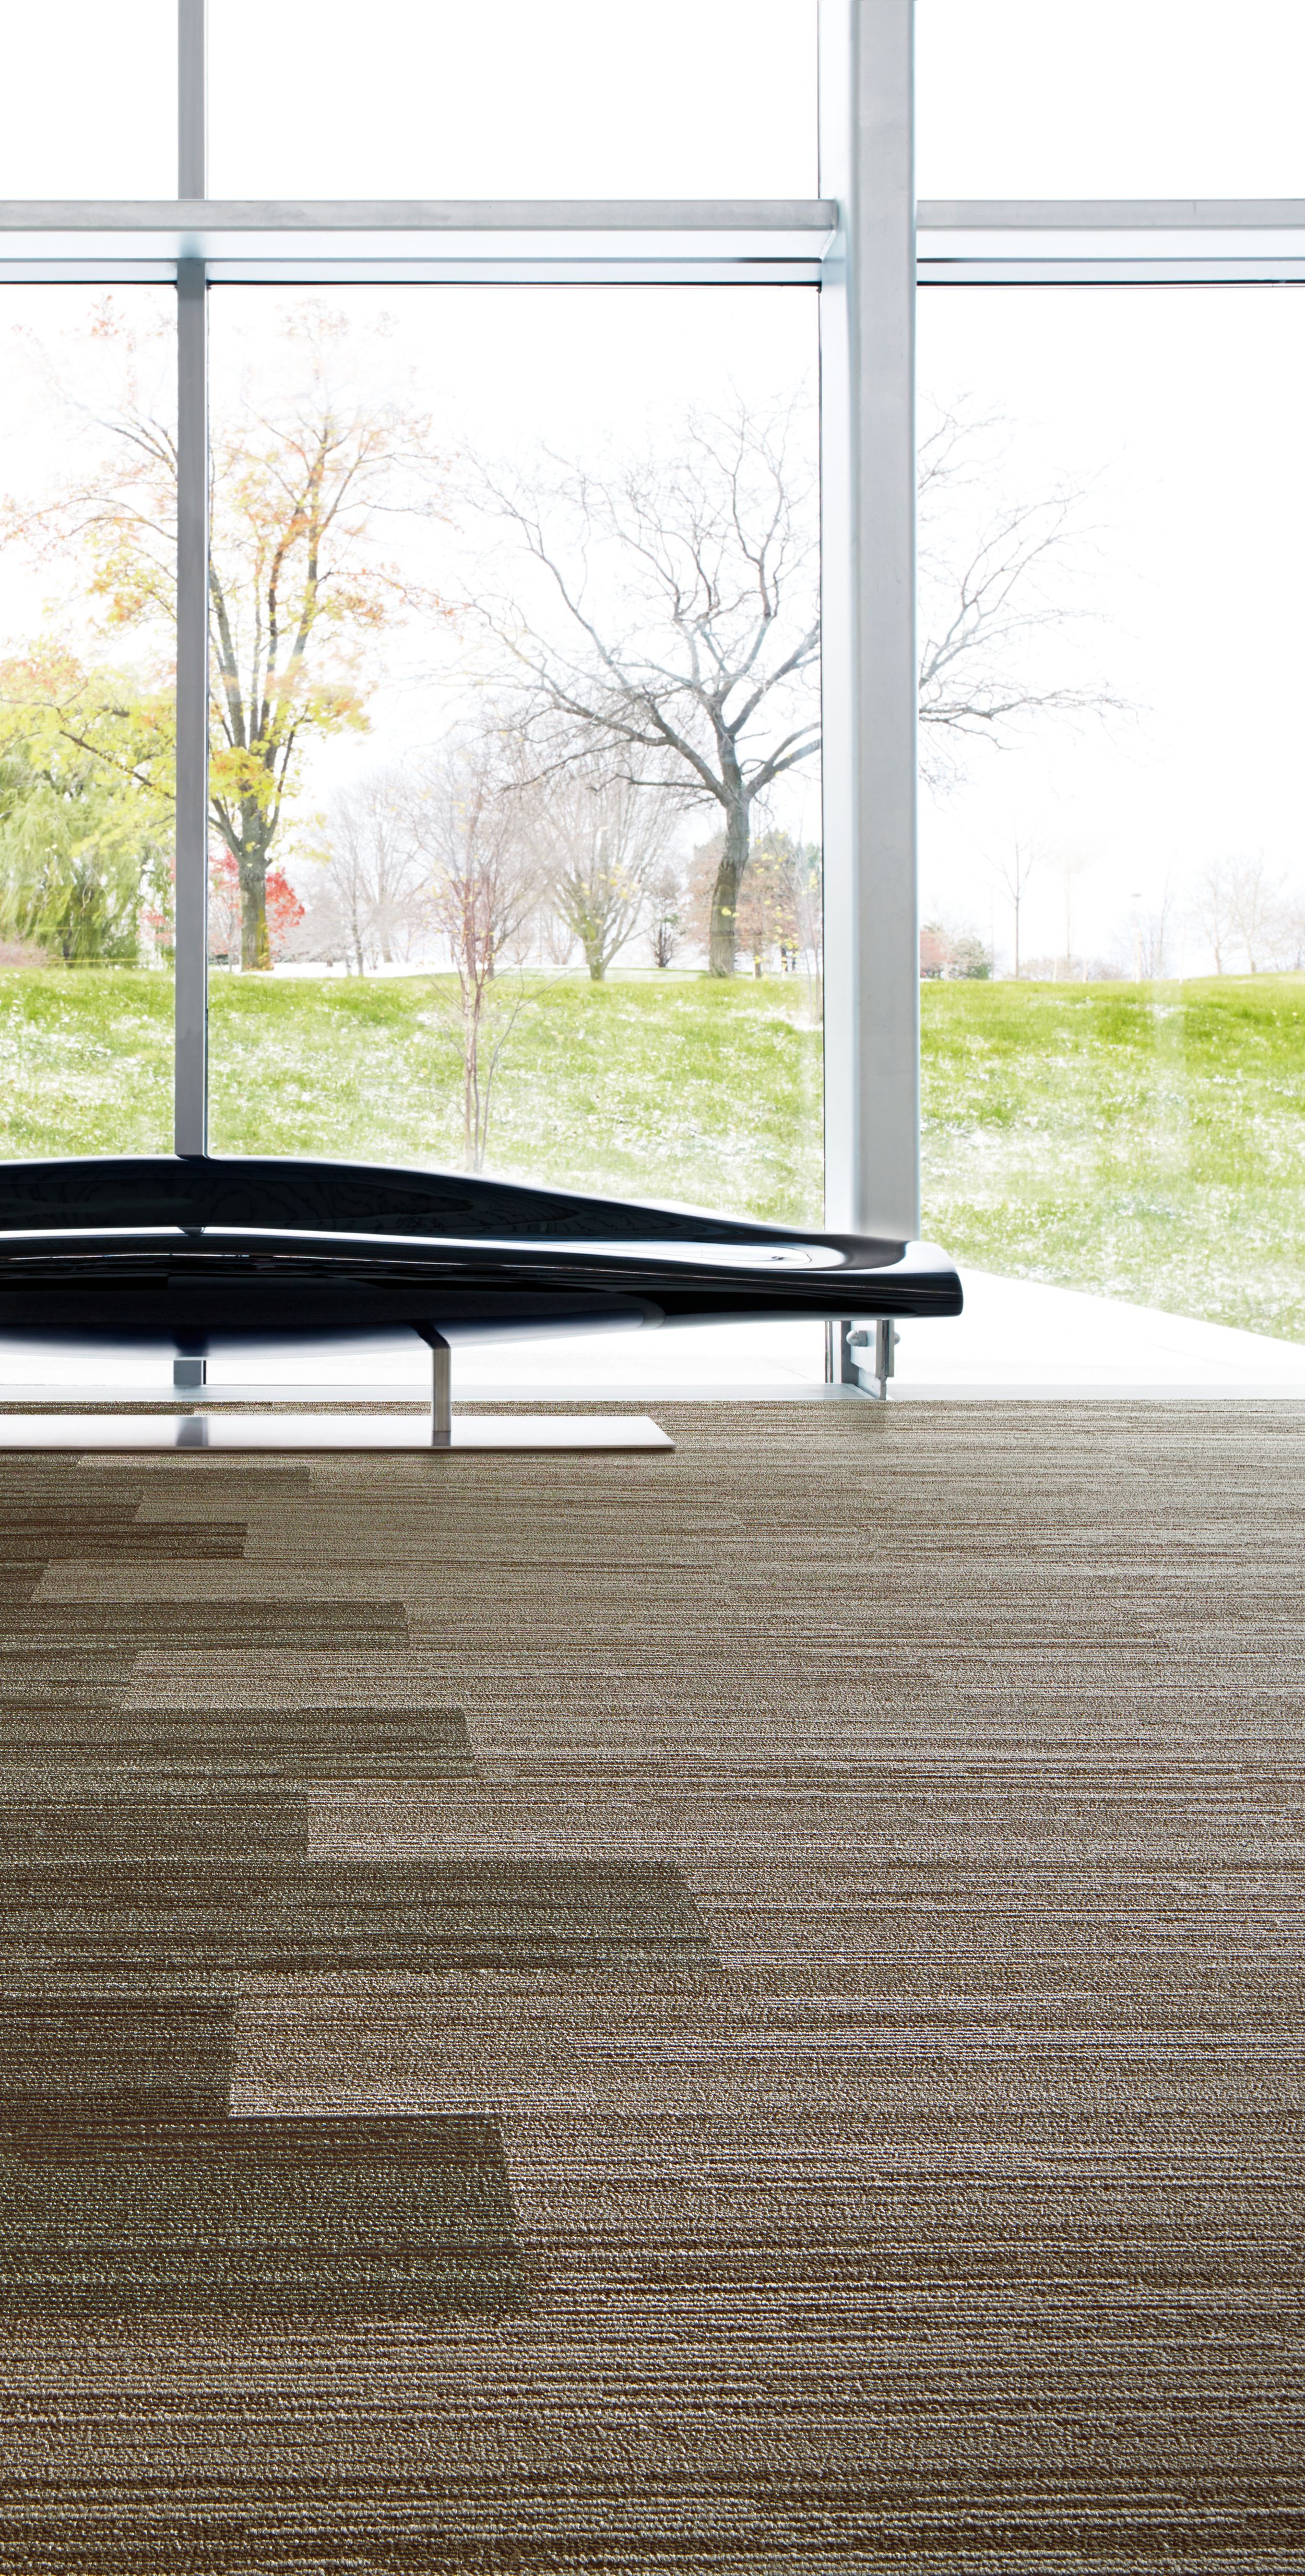 Interface Progression III plank carpet tile in room with seating area by window imagen número 9